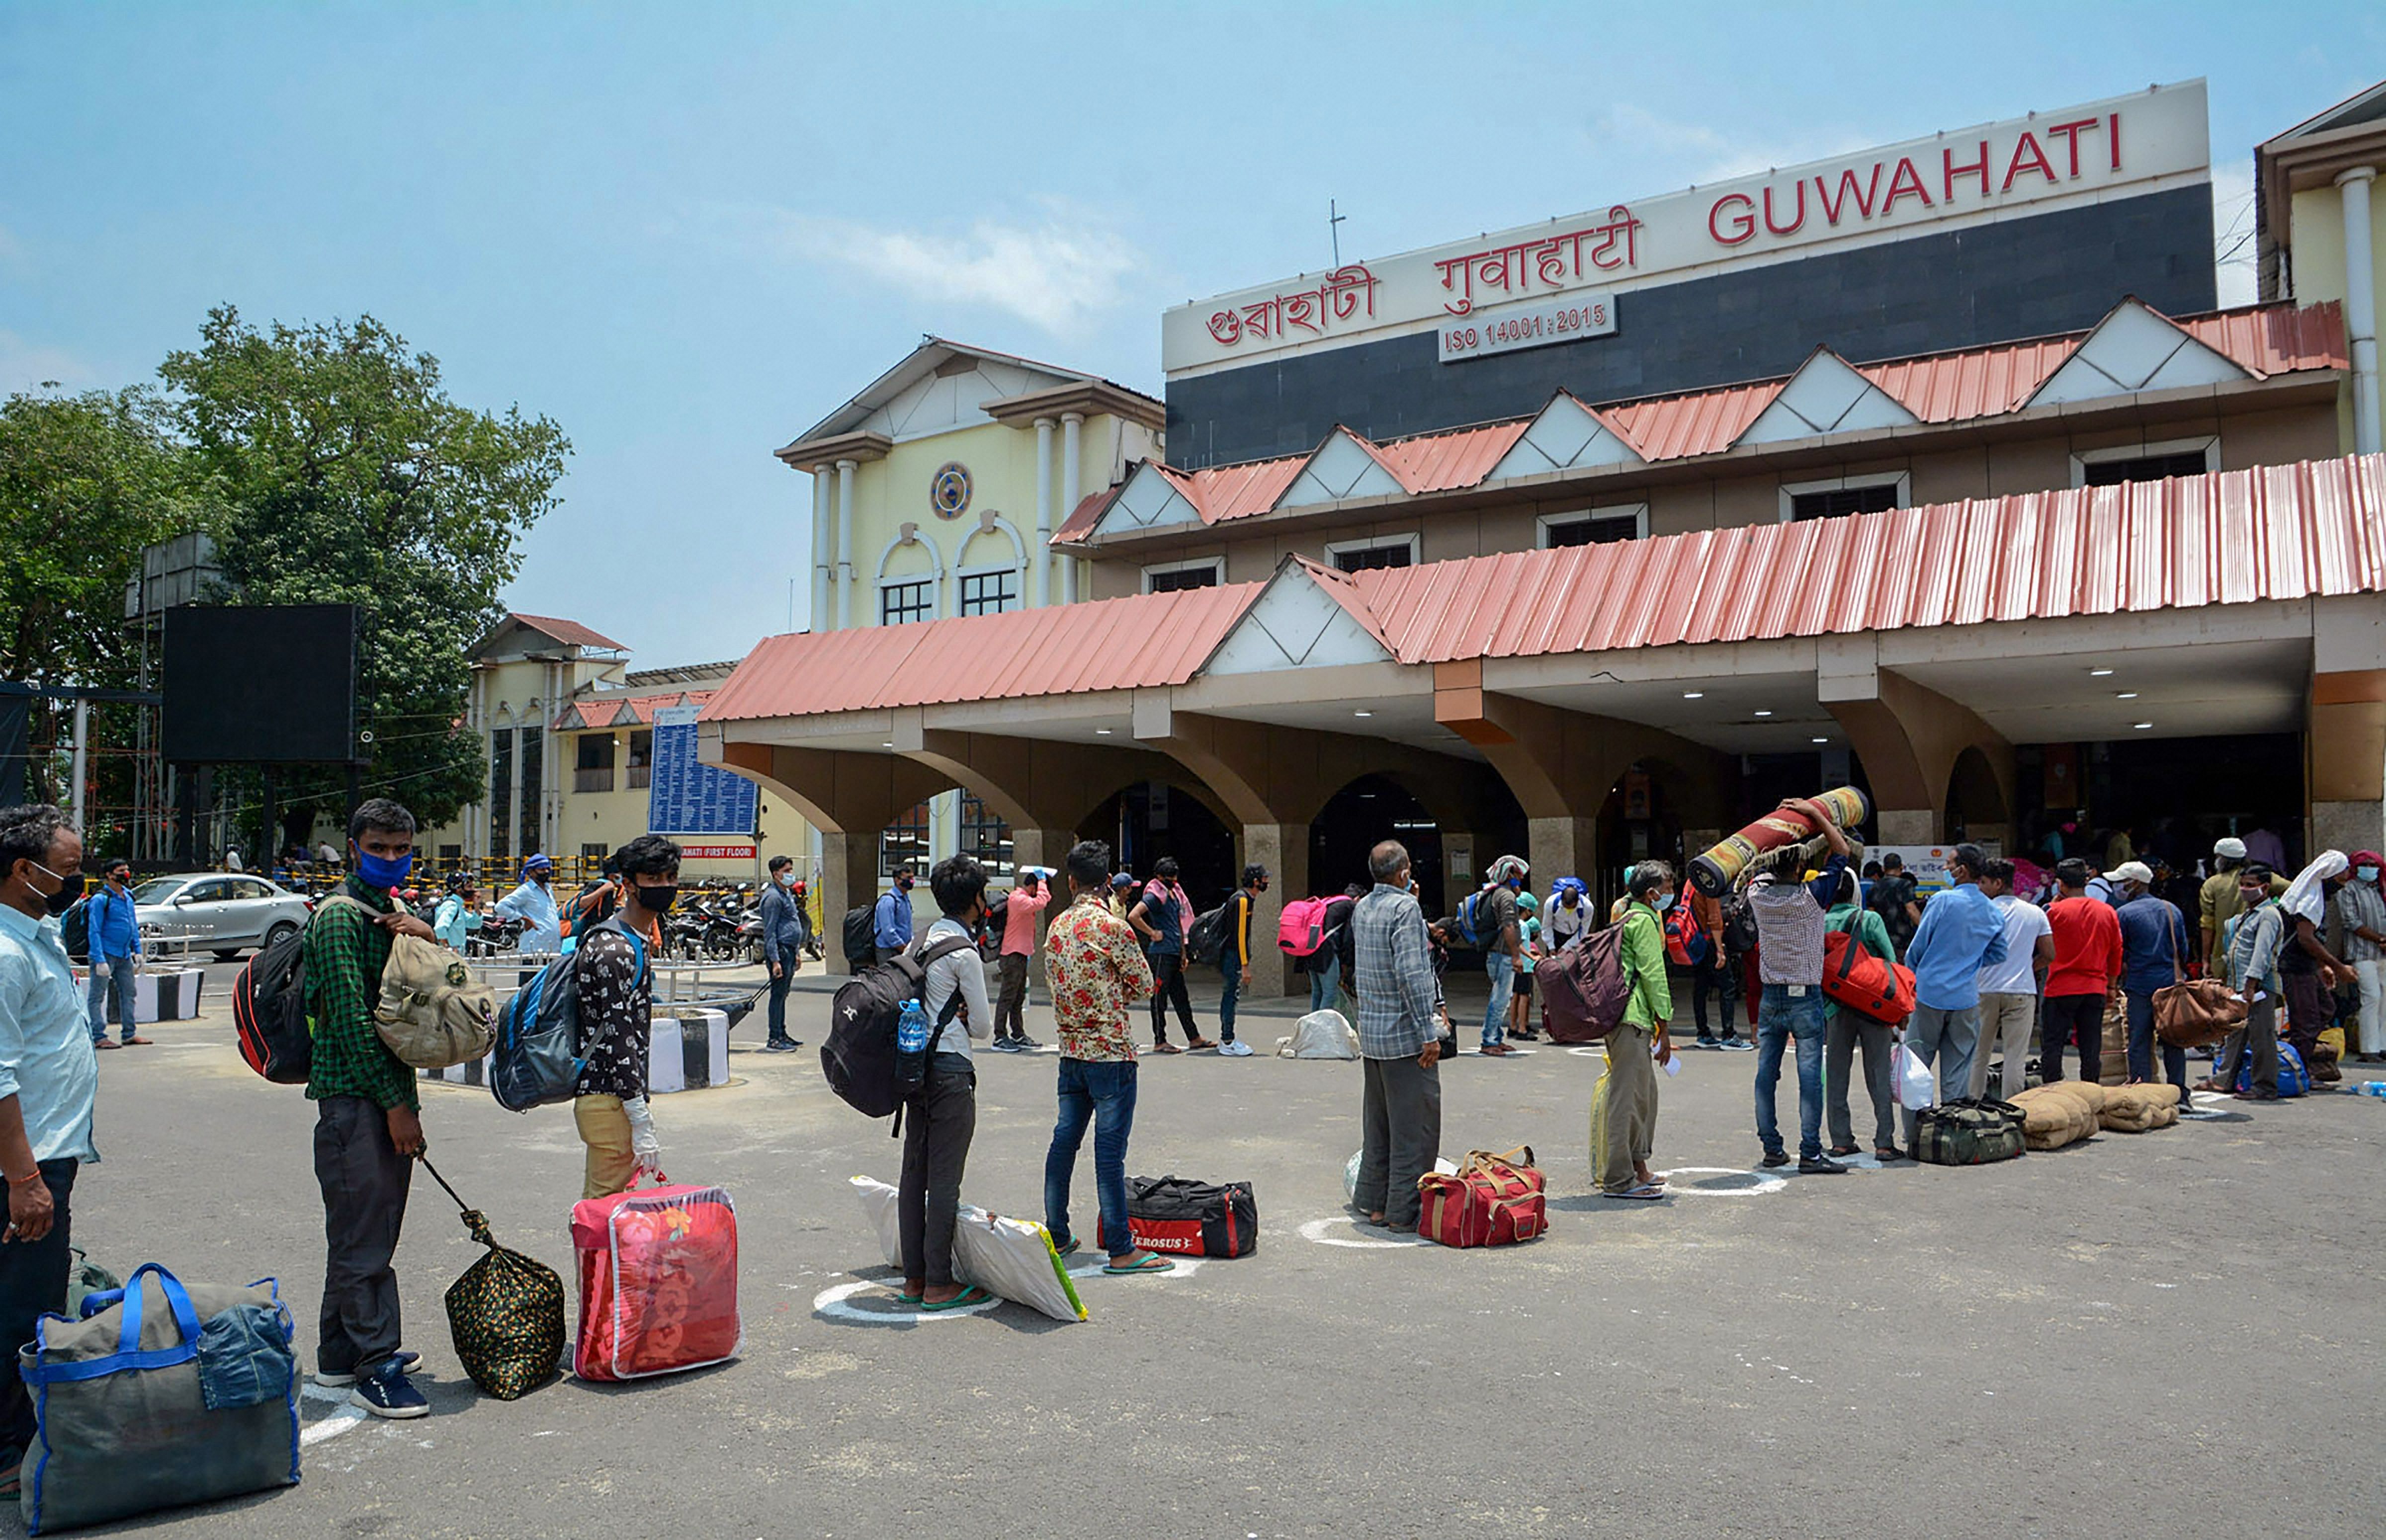 Passengers along with their luggage stand in a queue outside Guwahati Railway station to board a train, during the ongoing COVID-19 lockdown, in Guwahati. (PTI Photo)